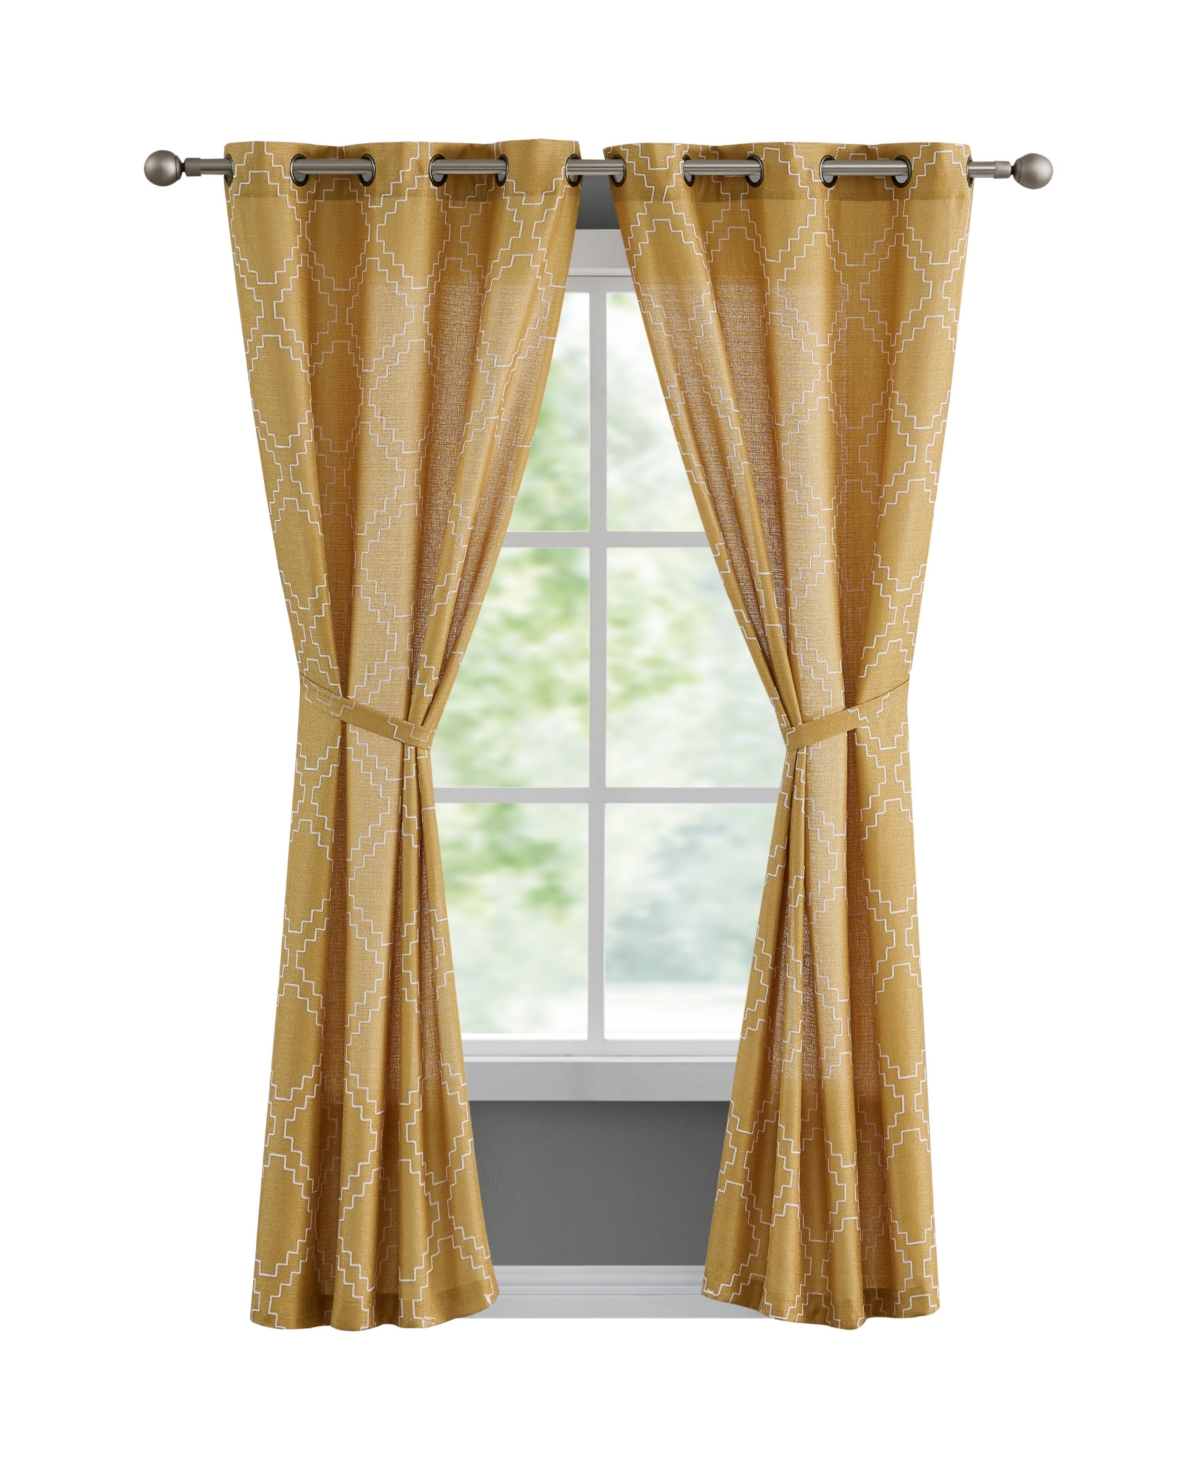 French Connection Somerset Embroidered Light Filtering Grommet Window Curtain Panel Pair With Tiebacks, 38" X 84" In Gold-tone